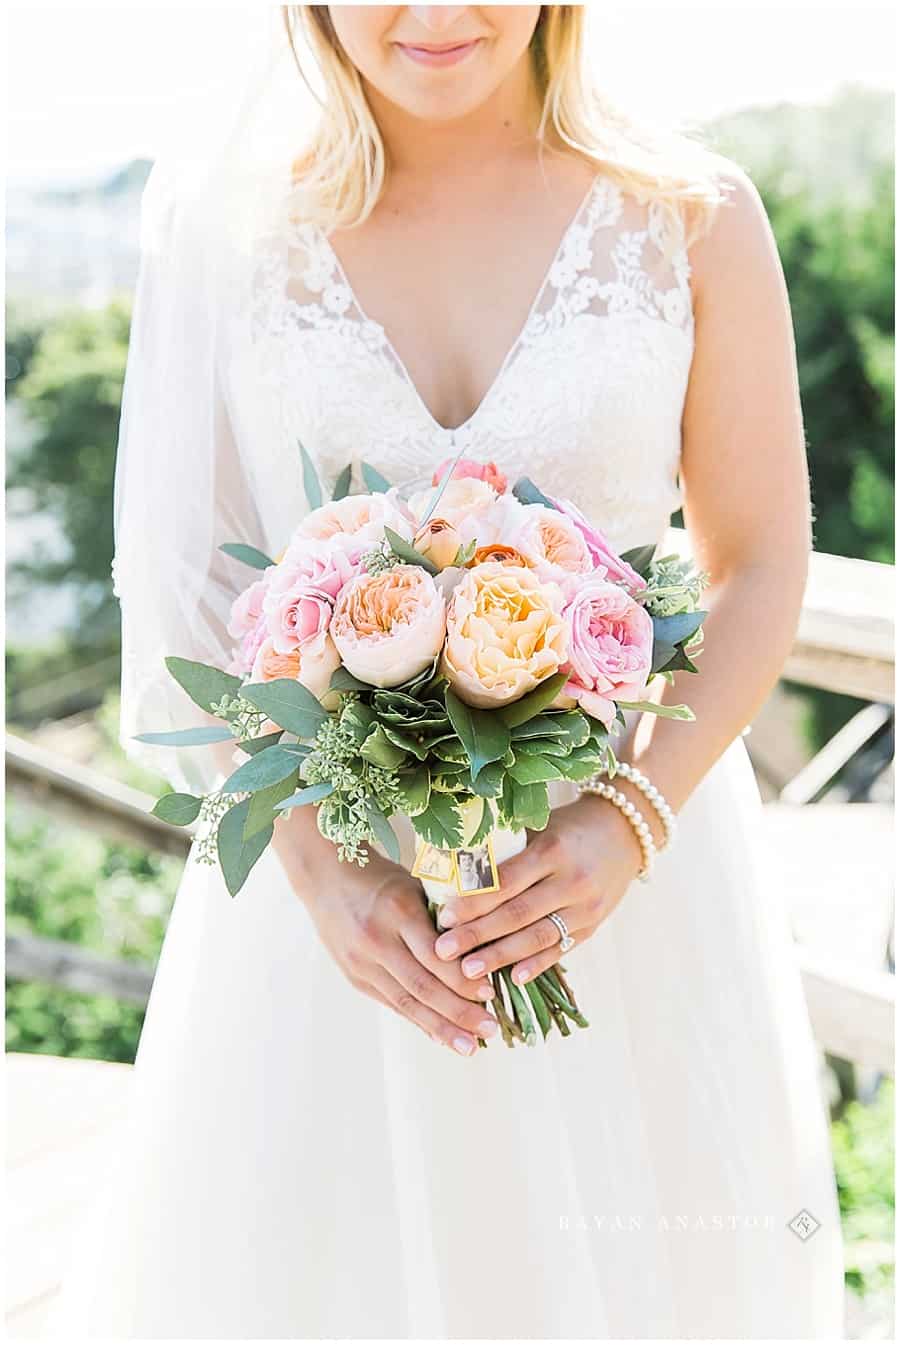 Bridal Bouquet with pinks and oranges